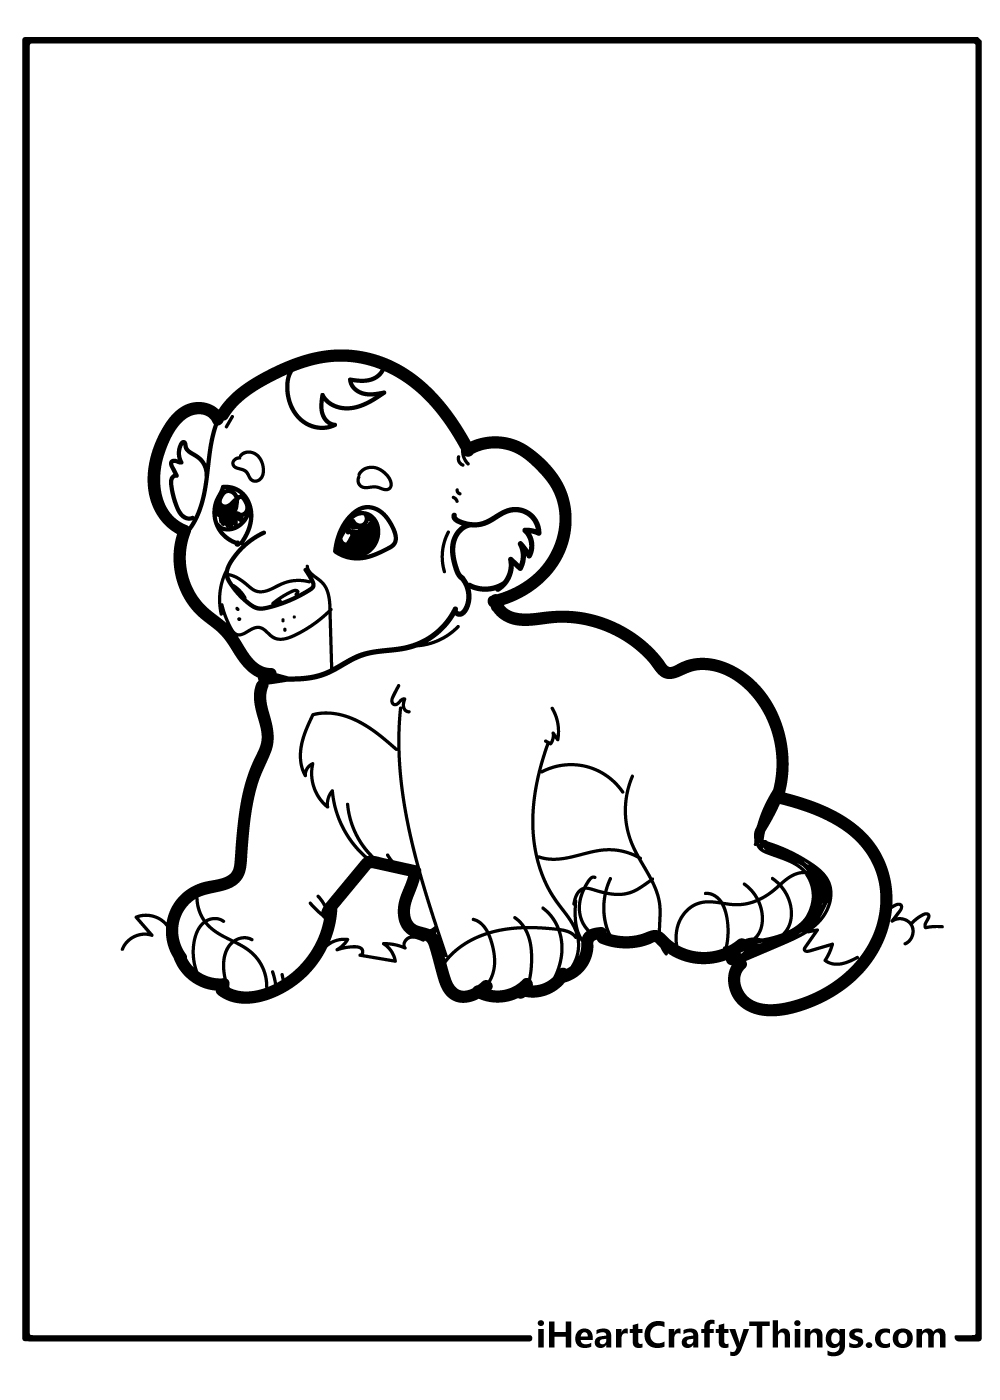 Lion Coloring Sheet for children free download